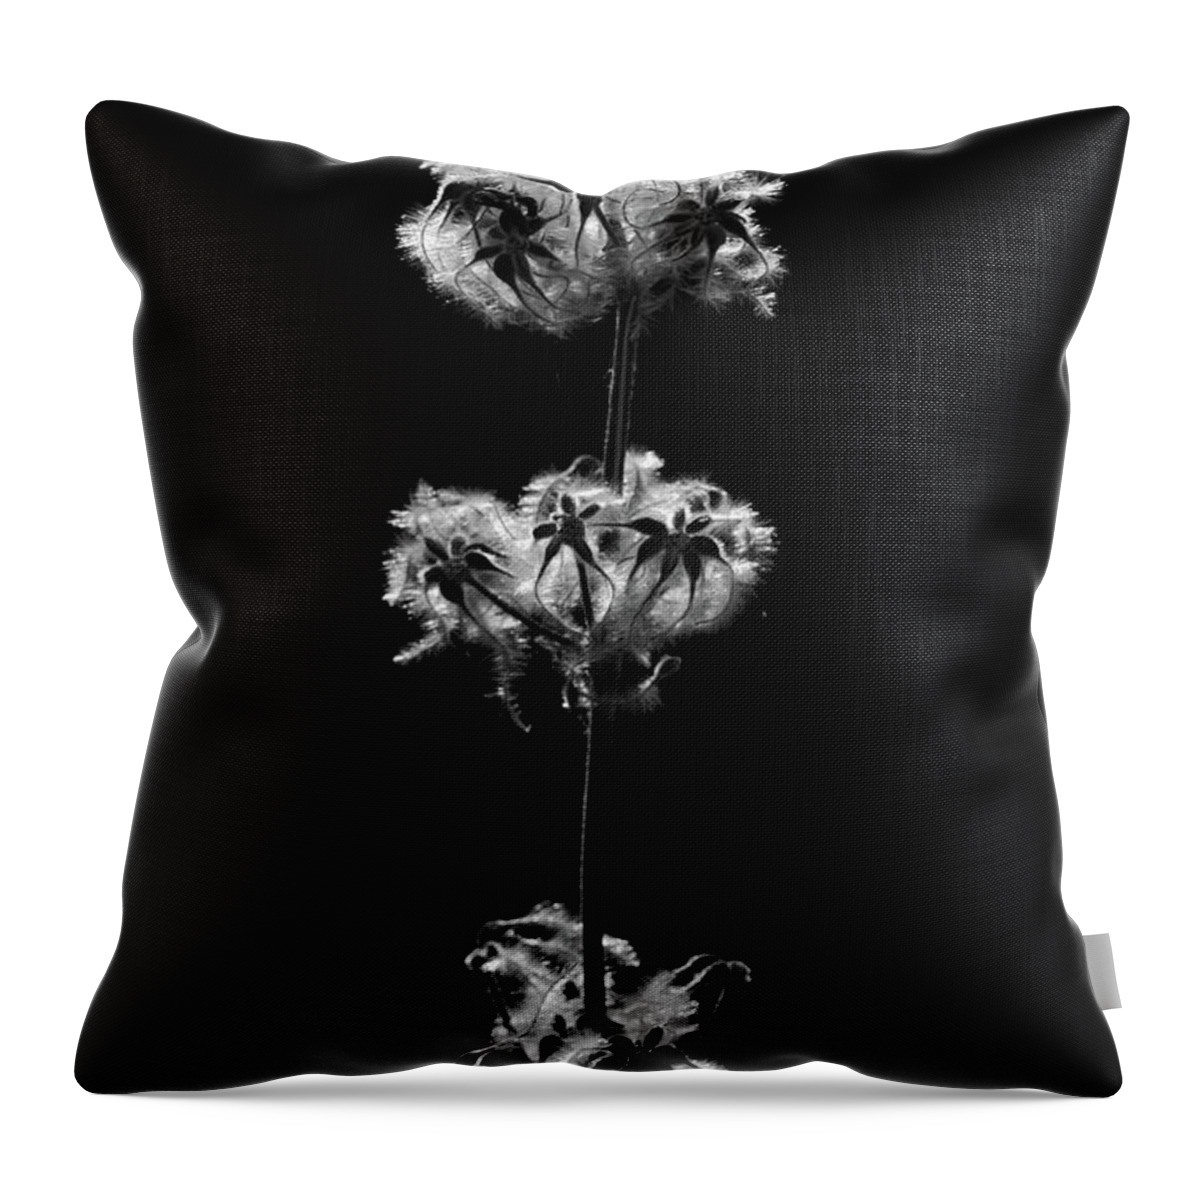 Seeds Throw Pillow featuring the photograph Life Circle by Catherine Lau